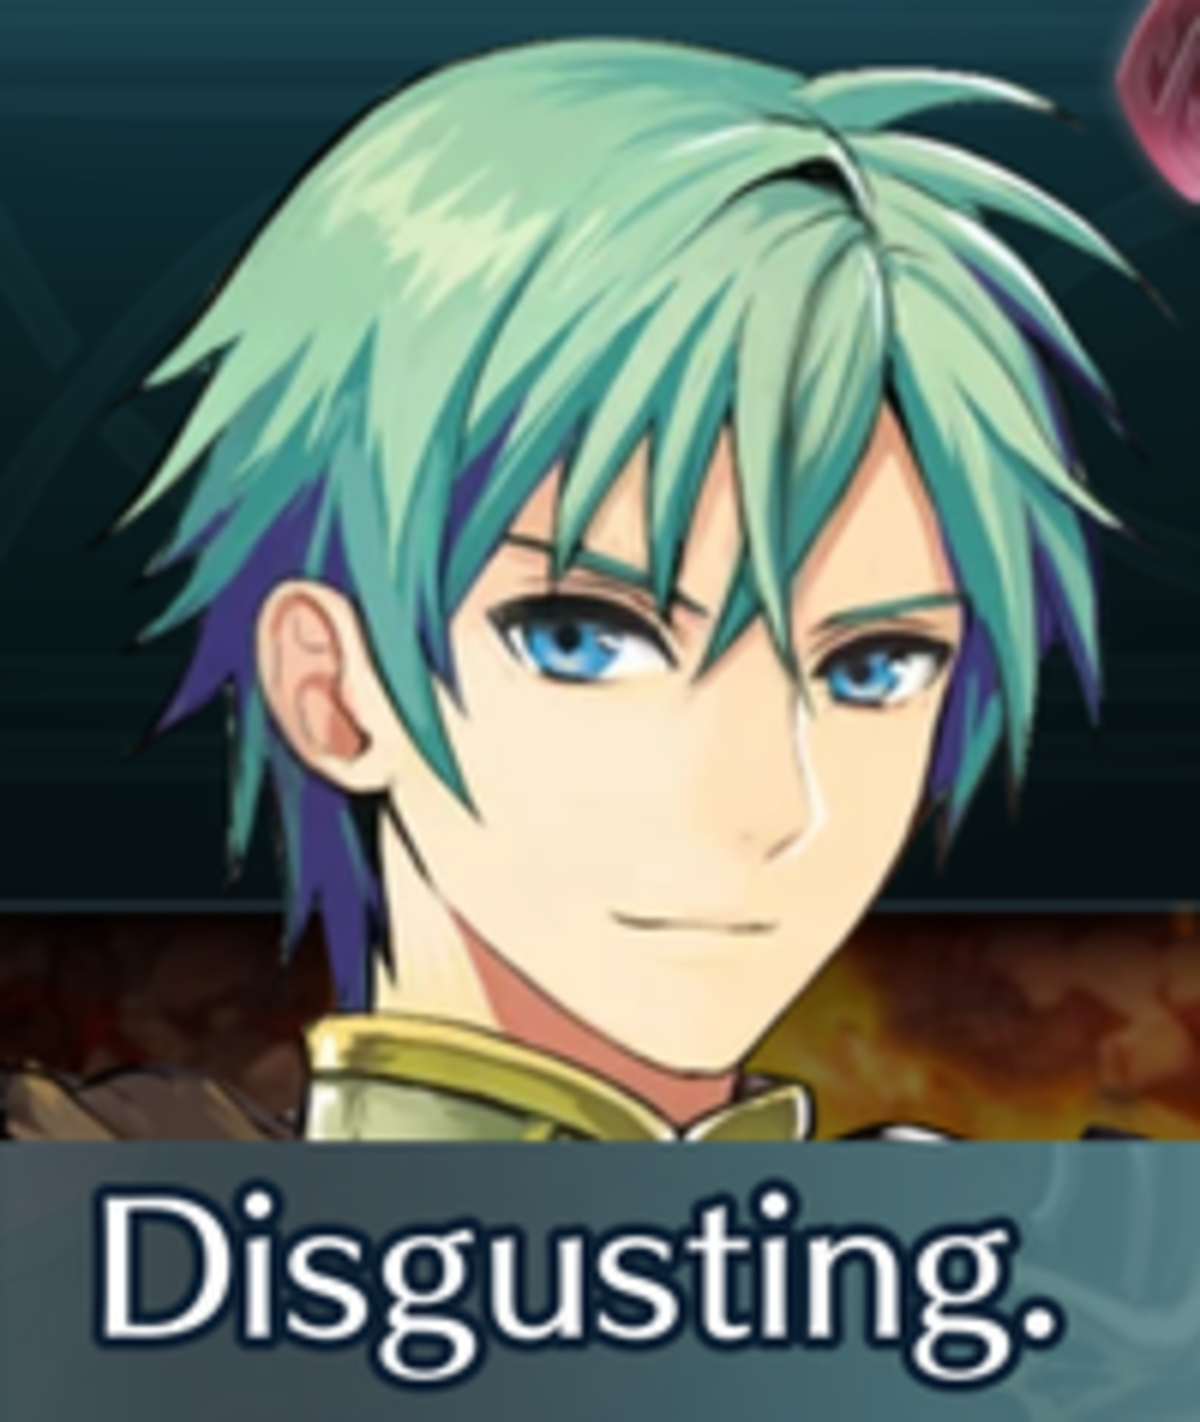 Ephraim Disgusting. .. I would too if she was my sister.